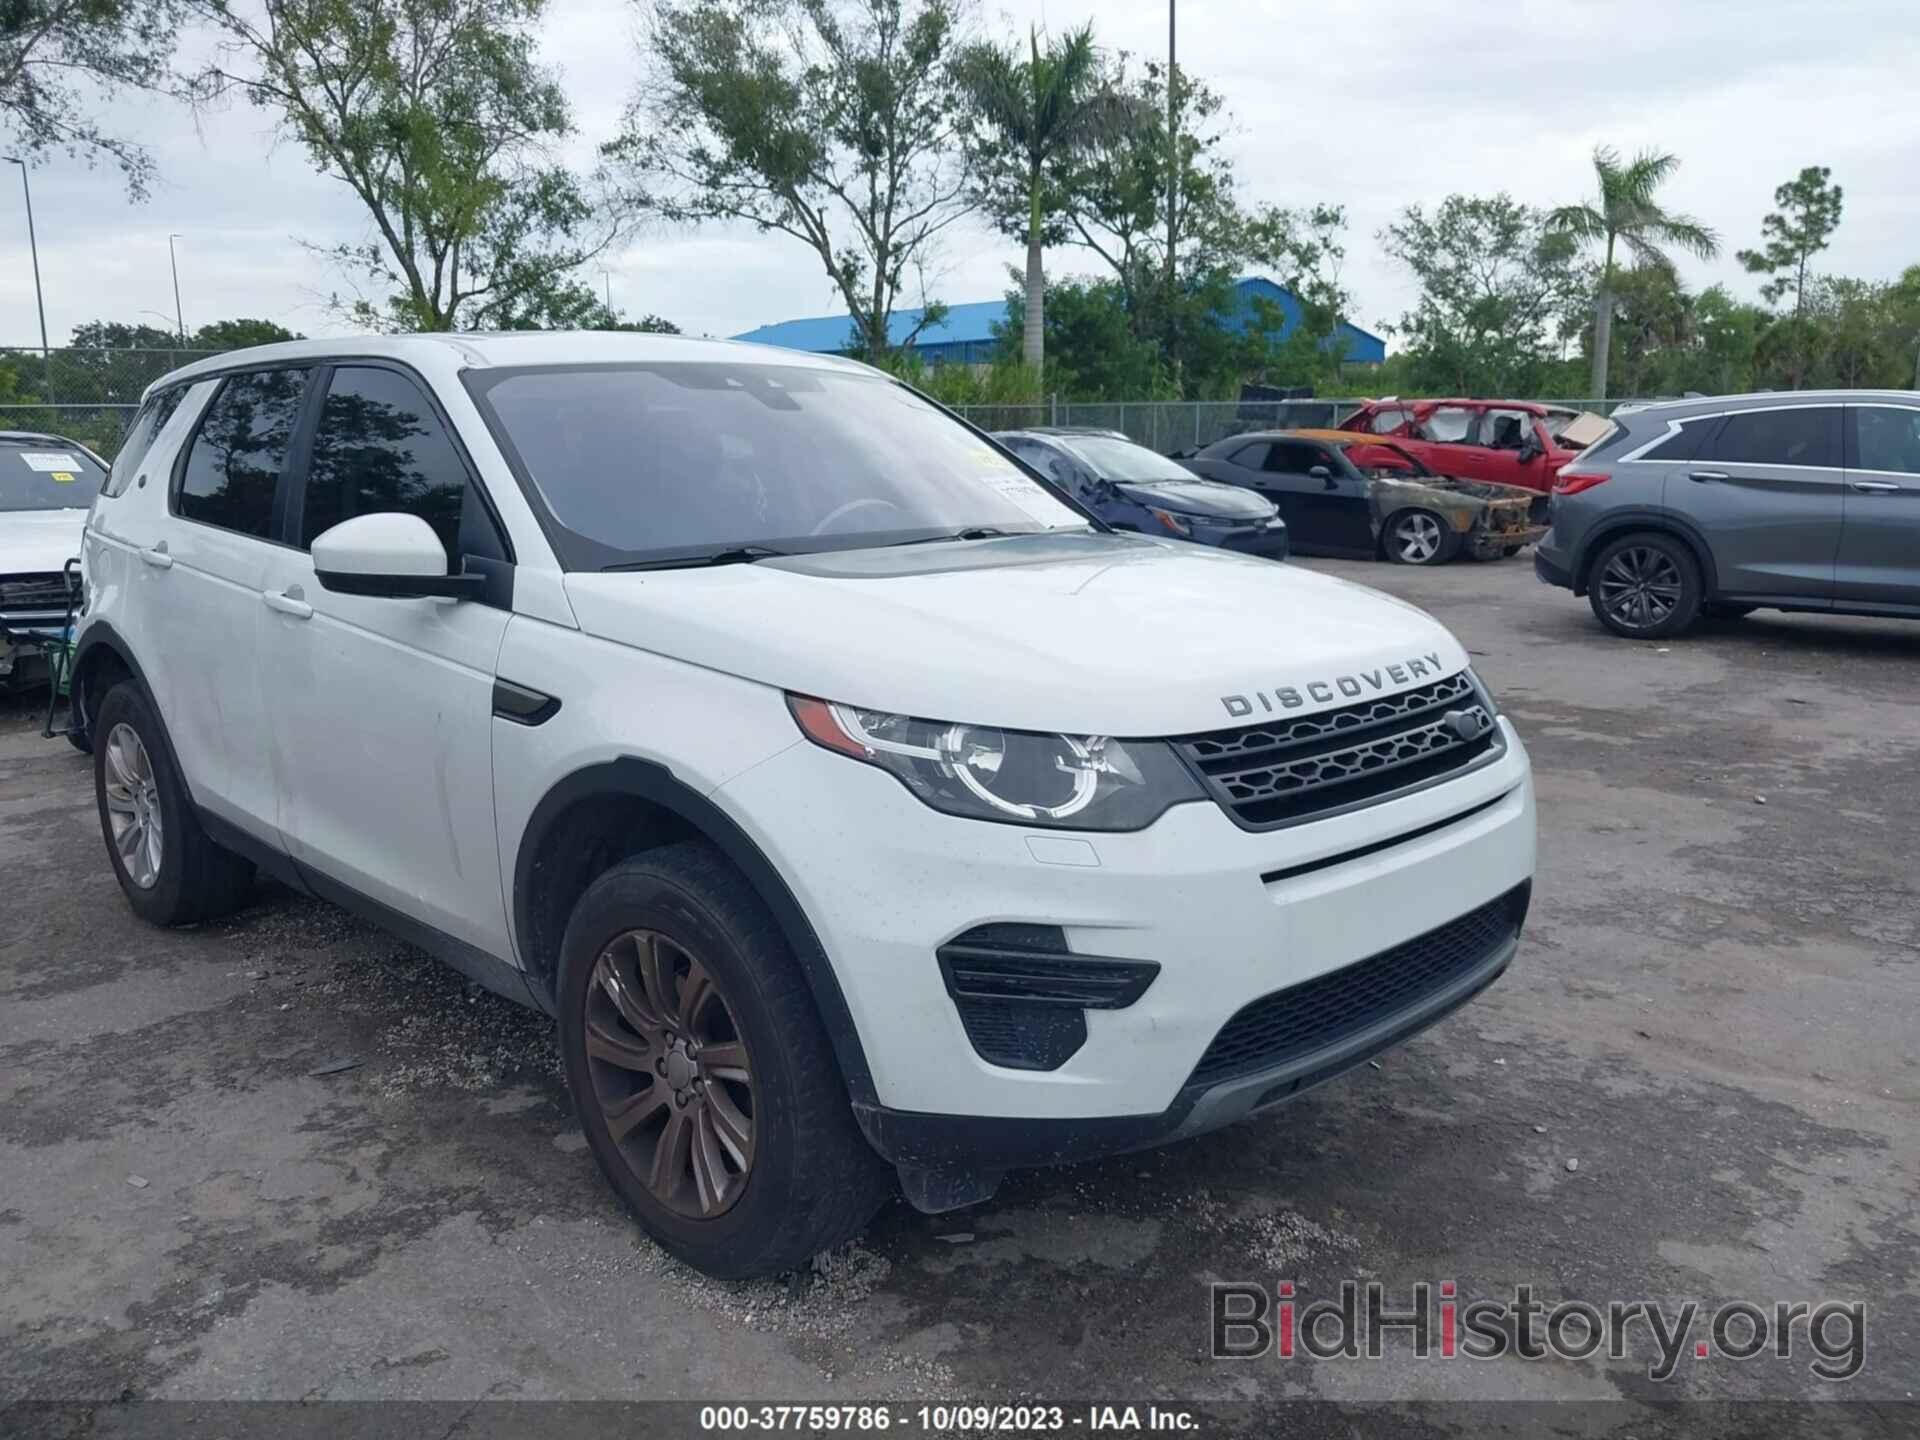 Фотография SALCP2RX1JH727759 - LAND ROVER DISCOVERY SPORT 2018